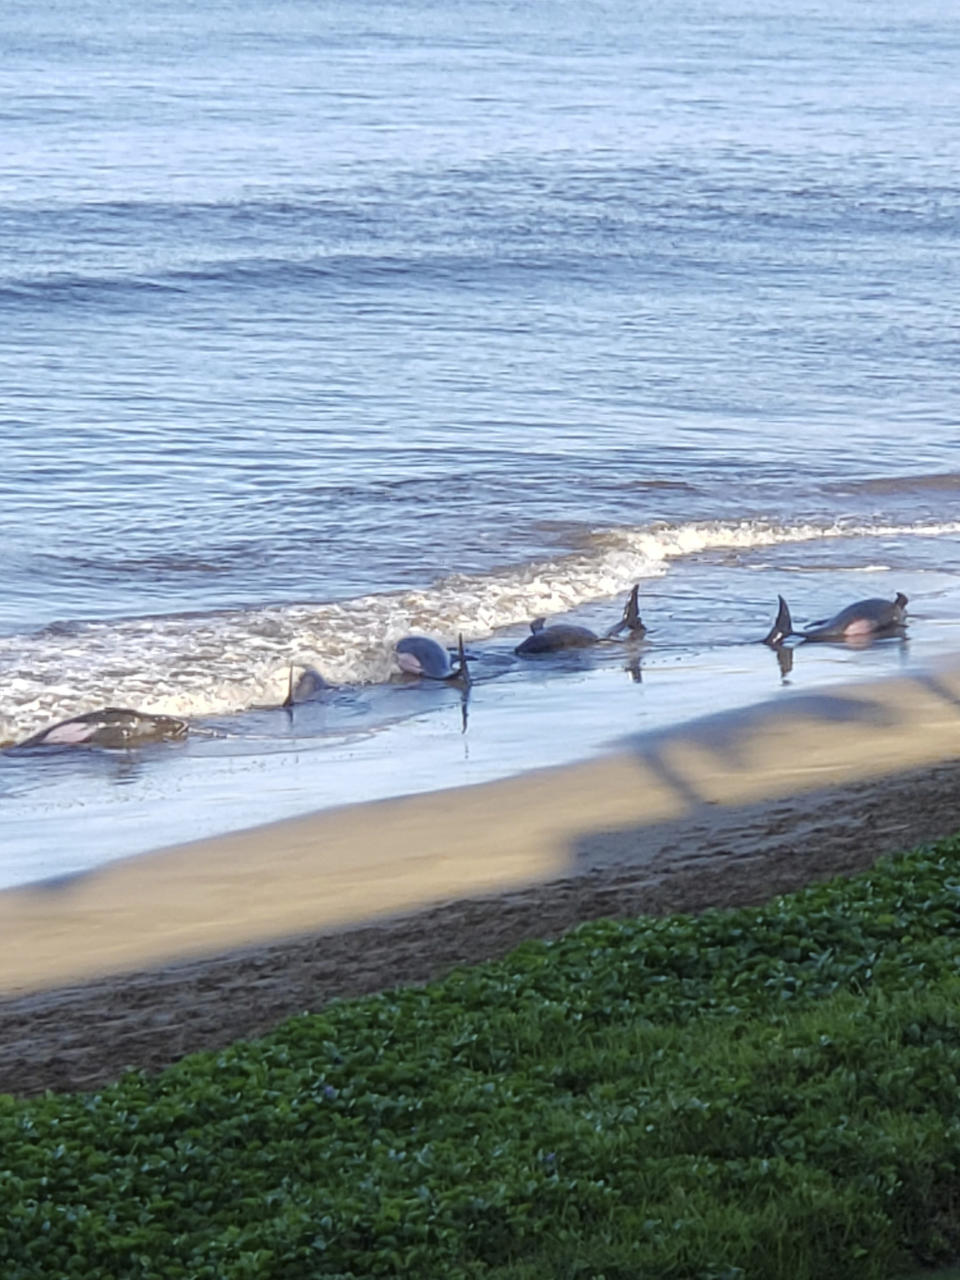 This photo provided by Kari Plas shows whales stranded on a beach in Kihei, Hawaii, on Thursday, Aug. 29, 2019. Five whales died, including four that were euthanized, after a mass stranding Thursday on a beach on the Hawaii island of Maui. (Kari Plas via AP)